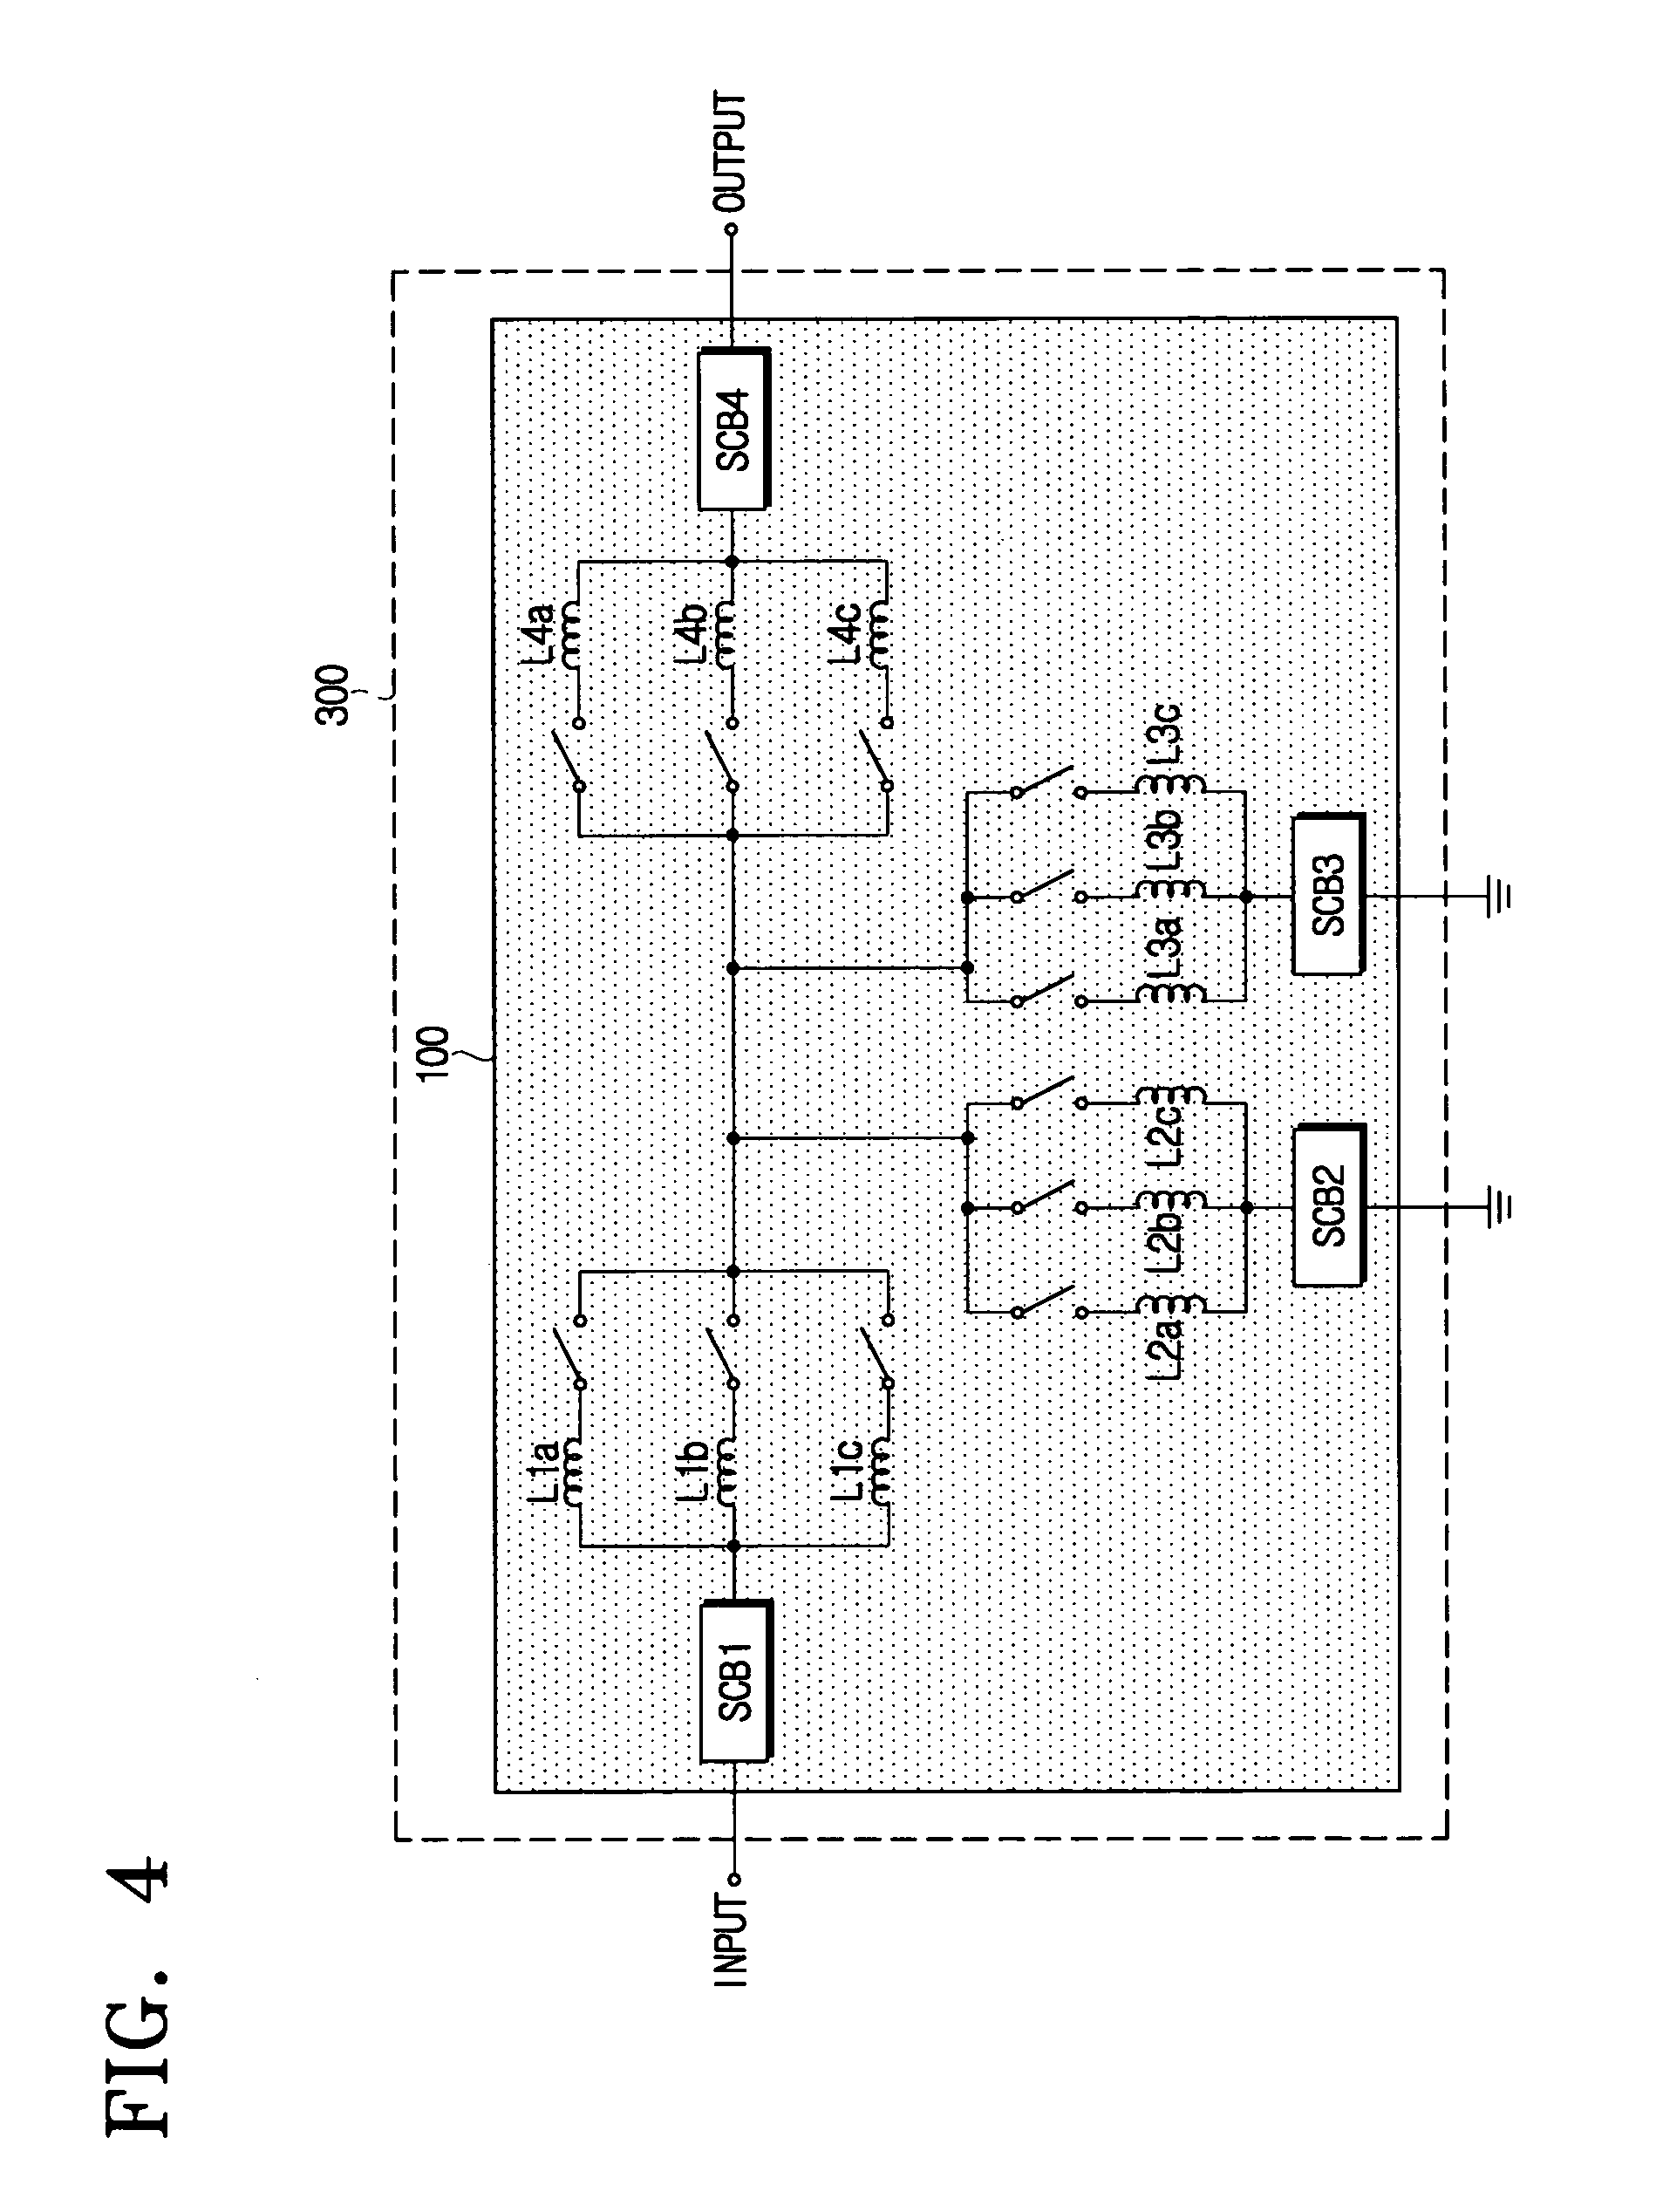 Tunable wideband bandpass filter, tunable multi-band wideband bandpass filter using the same, and methods therefore